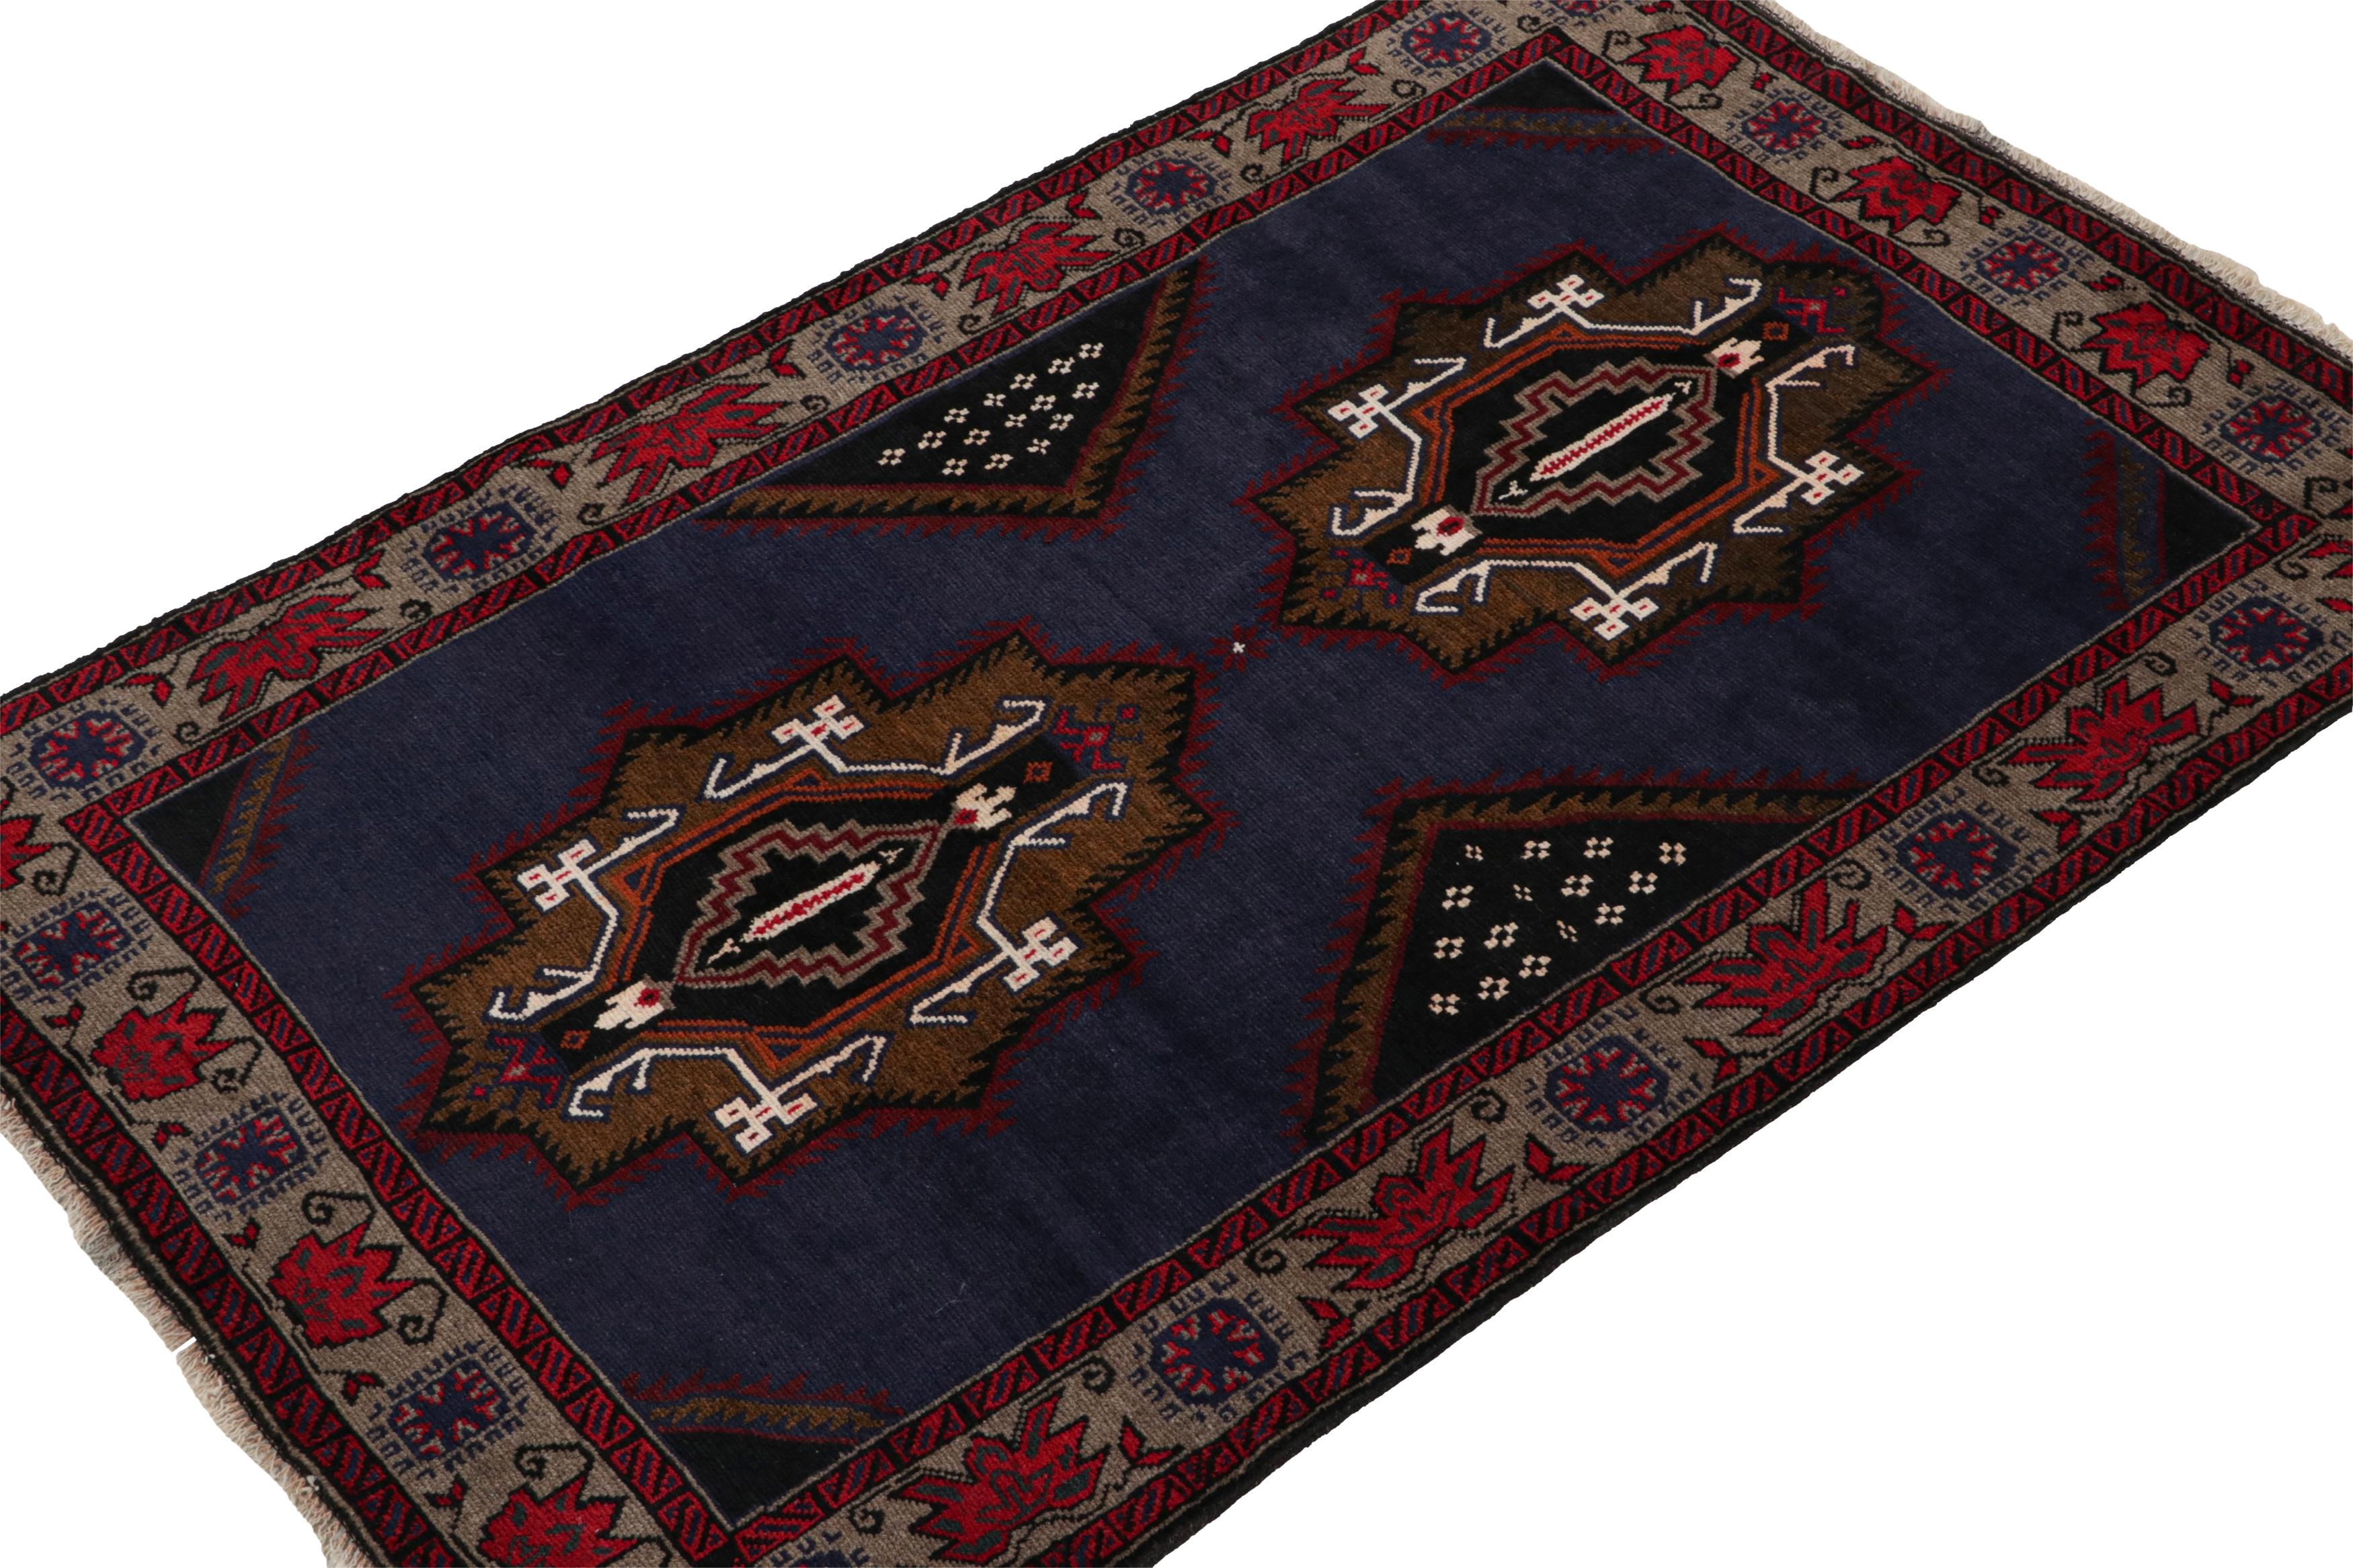 Hand-knotted in wool, this 4x6 Baluch Persian rug of the 1950s is the latest to enter Rug & Kilim’s prestigious Antique & Vintage collection.

On the Design:

The piece revels in blue with medallions in gold relishing red, black & white detailing.